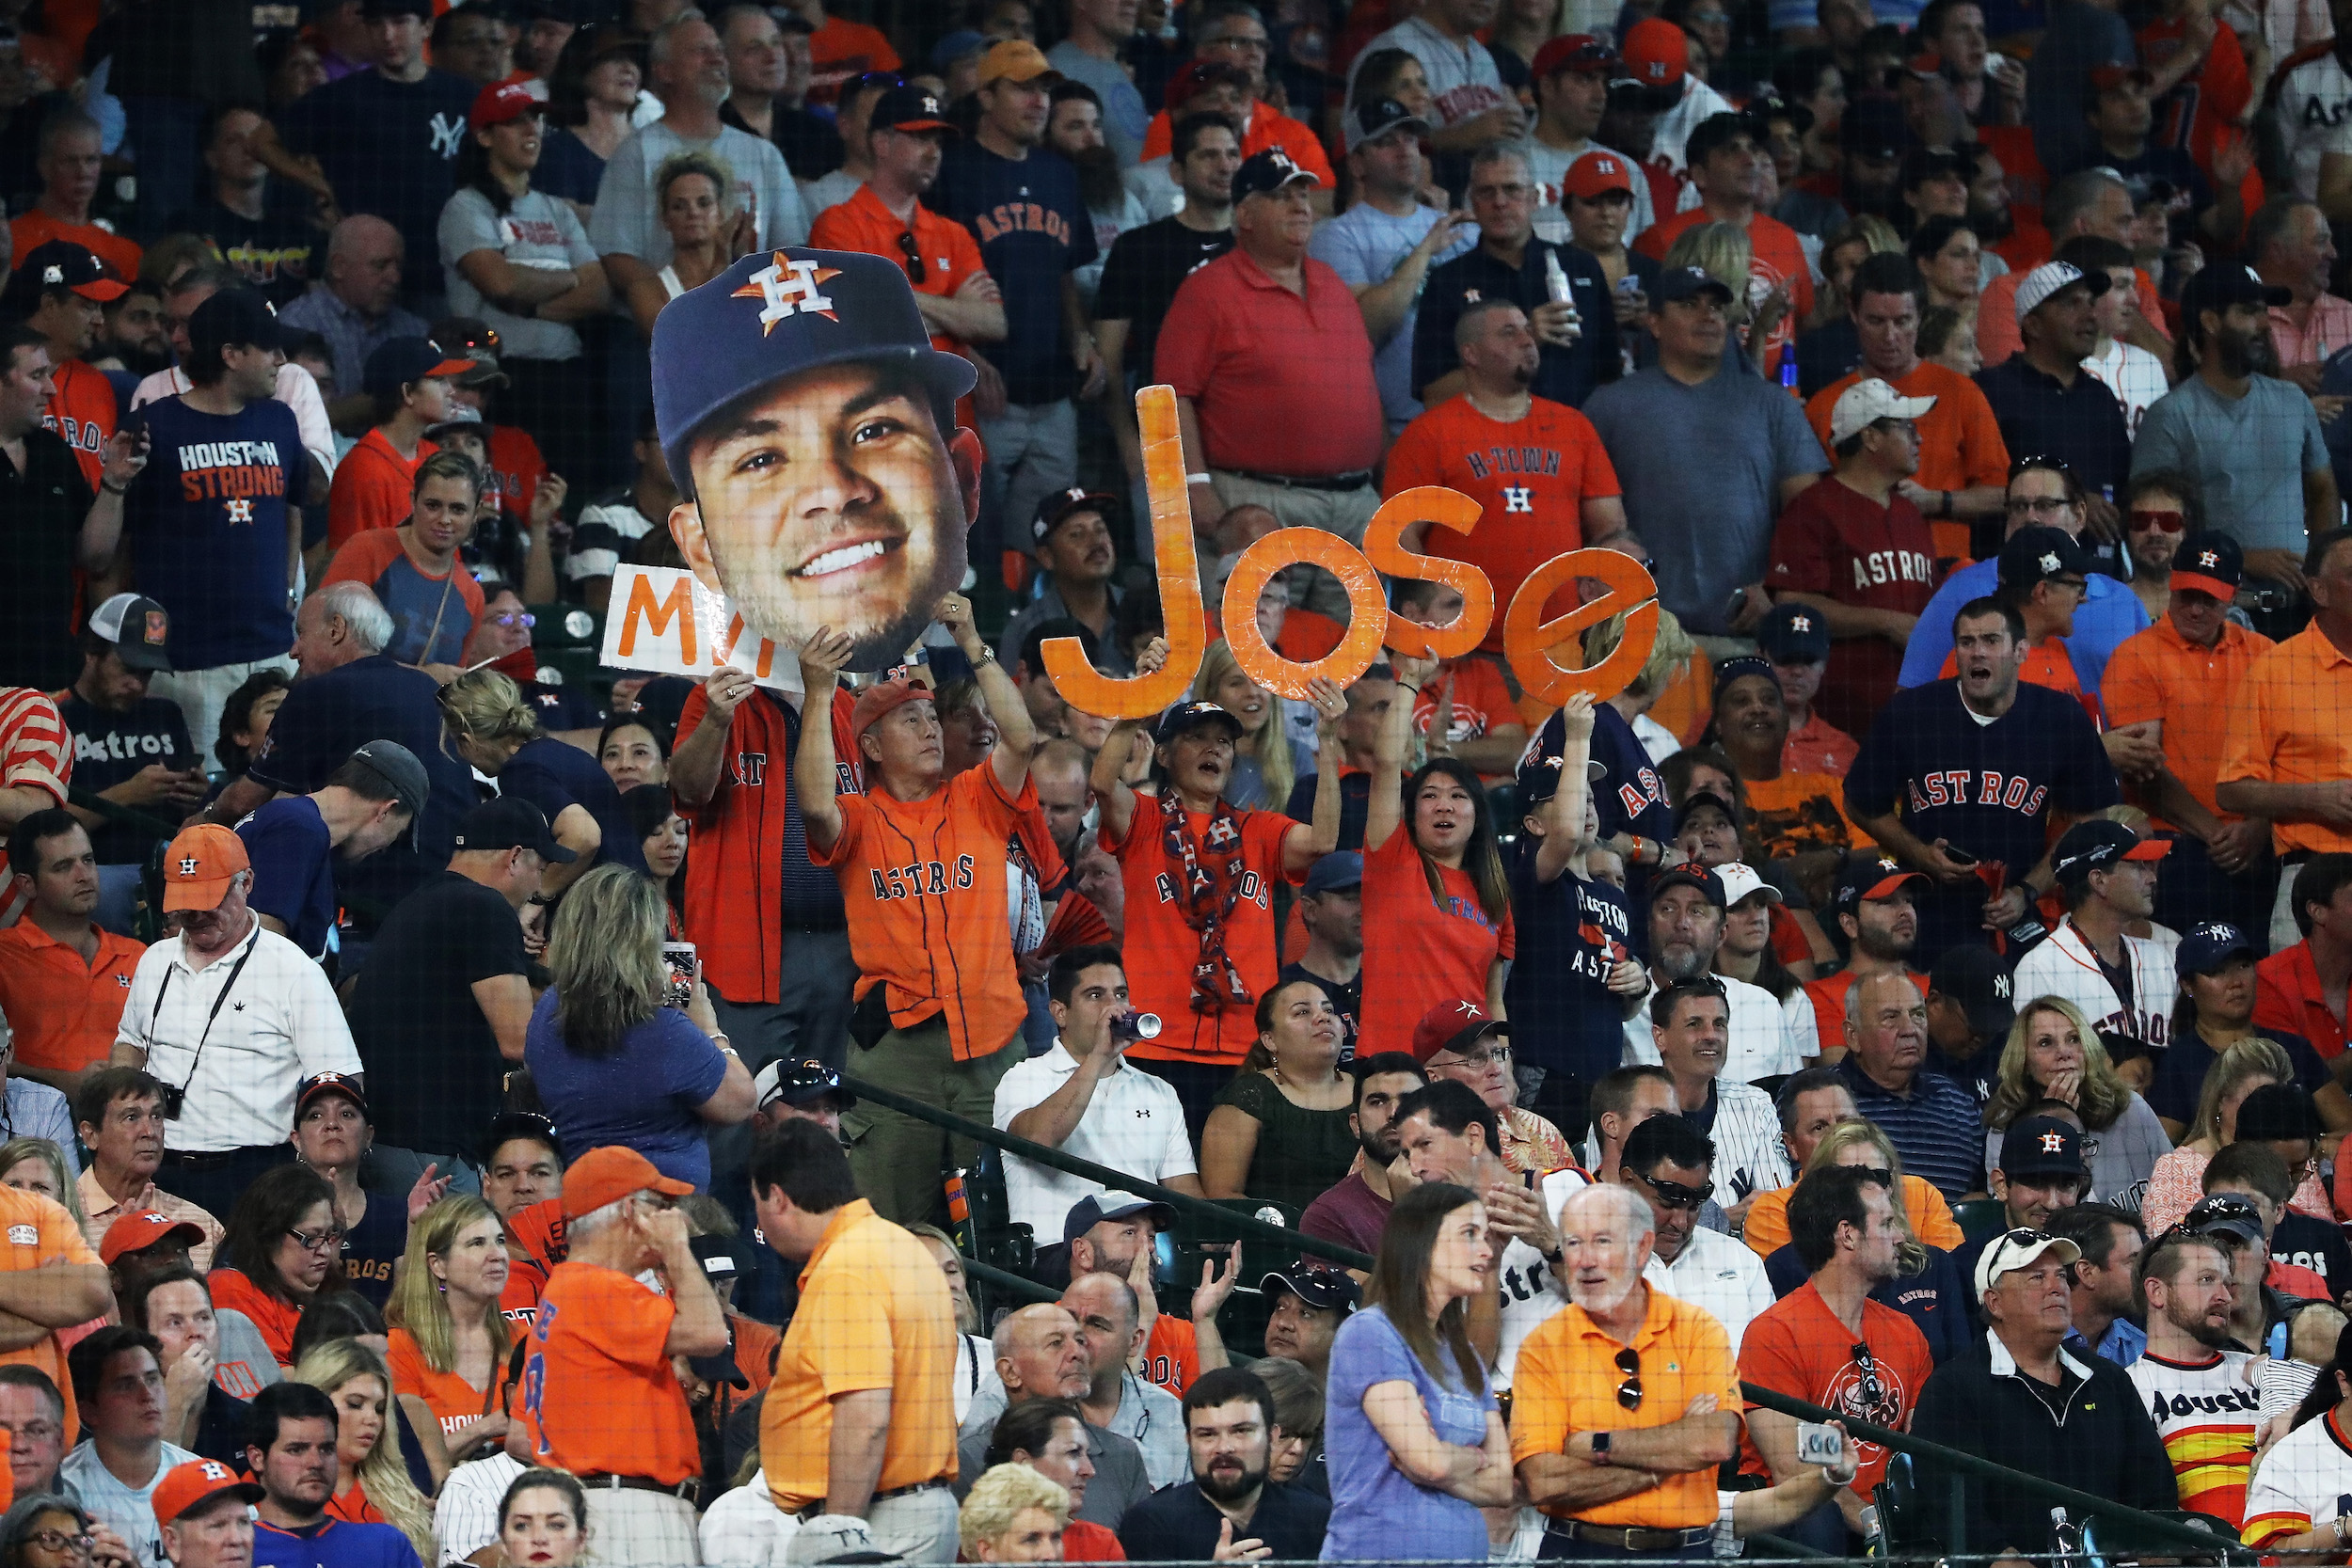 7 Things You'll Only Relate to If You're a Diehard Houston Astros Fan